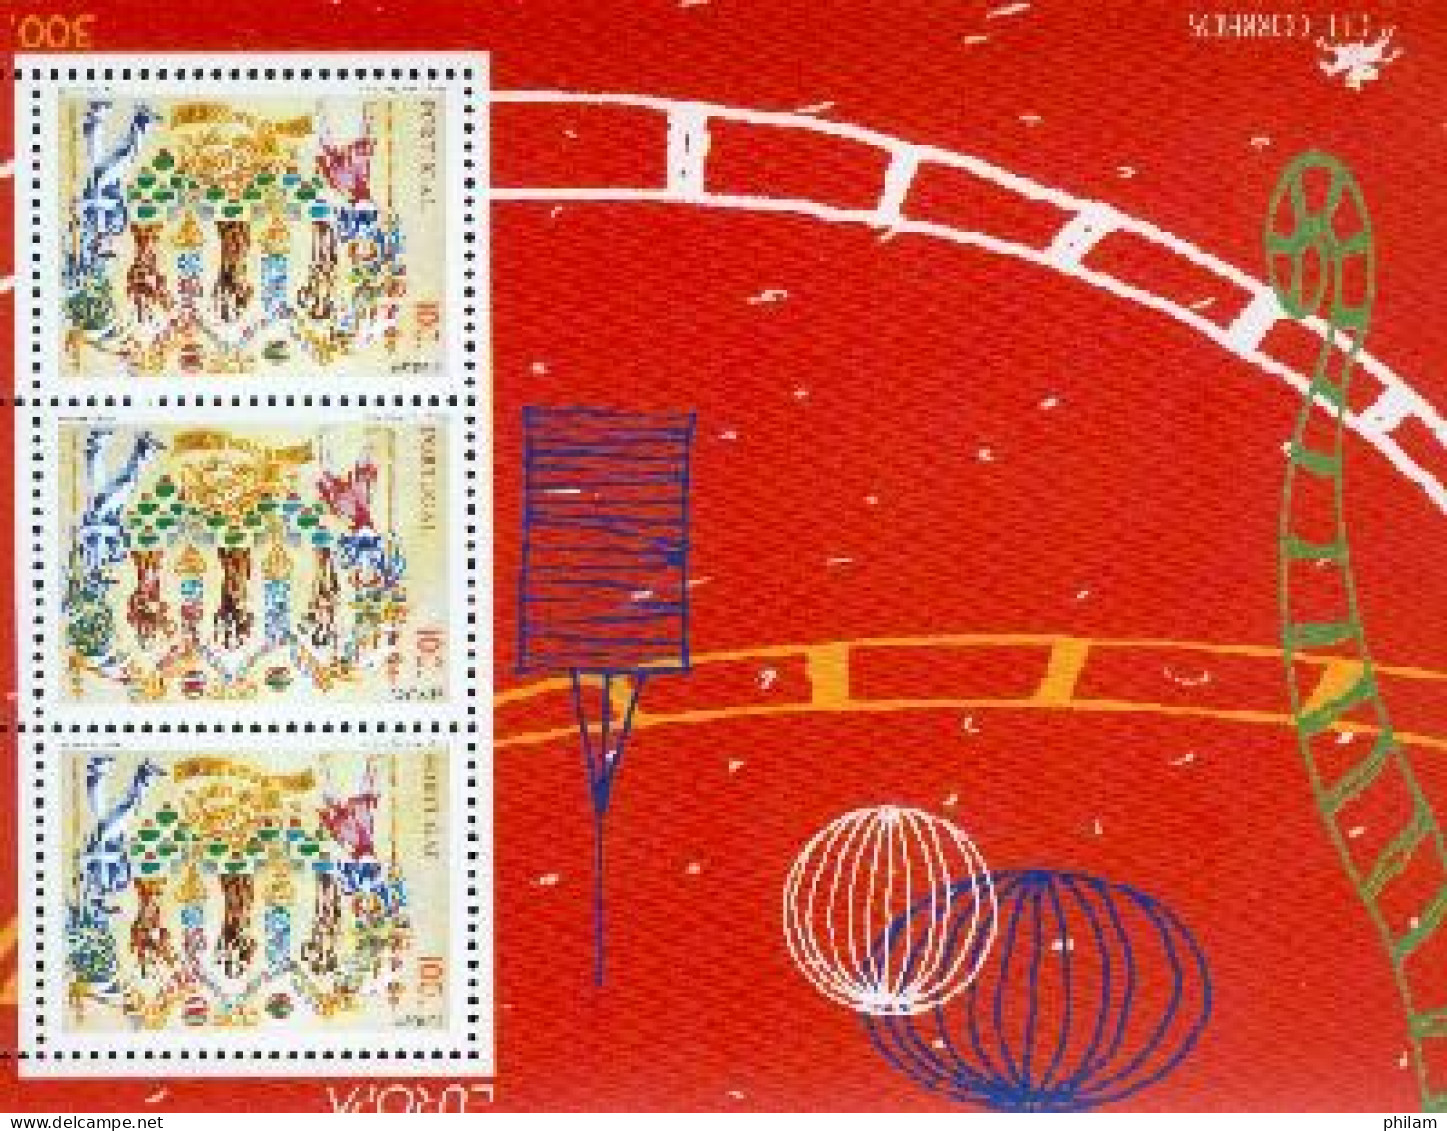 PORTUGAL 1998 - Europa - Fêtes Populaires - BF - 1998